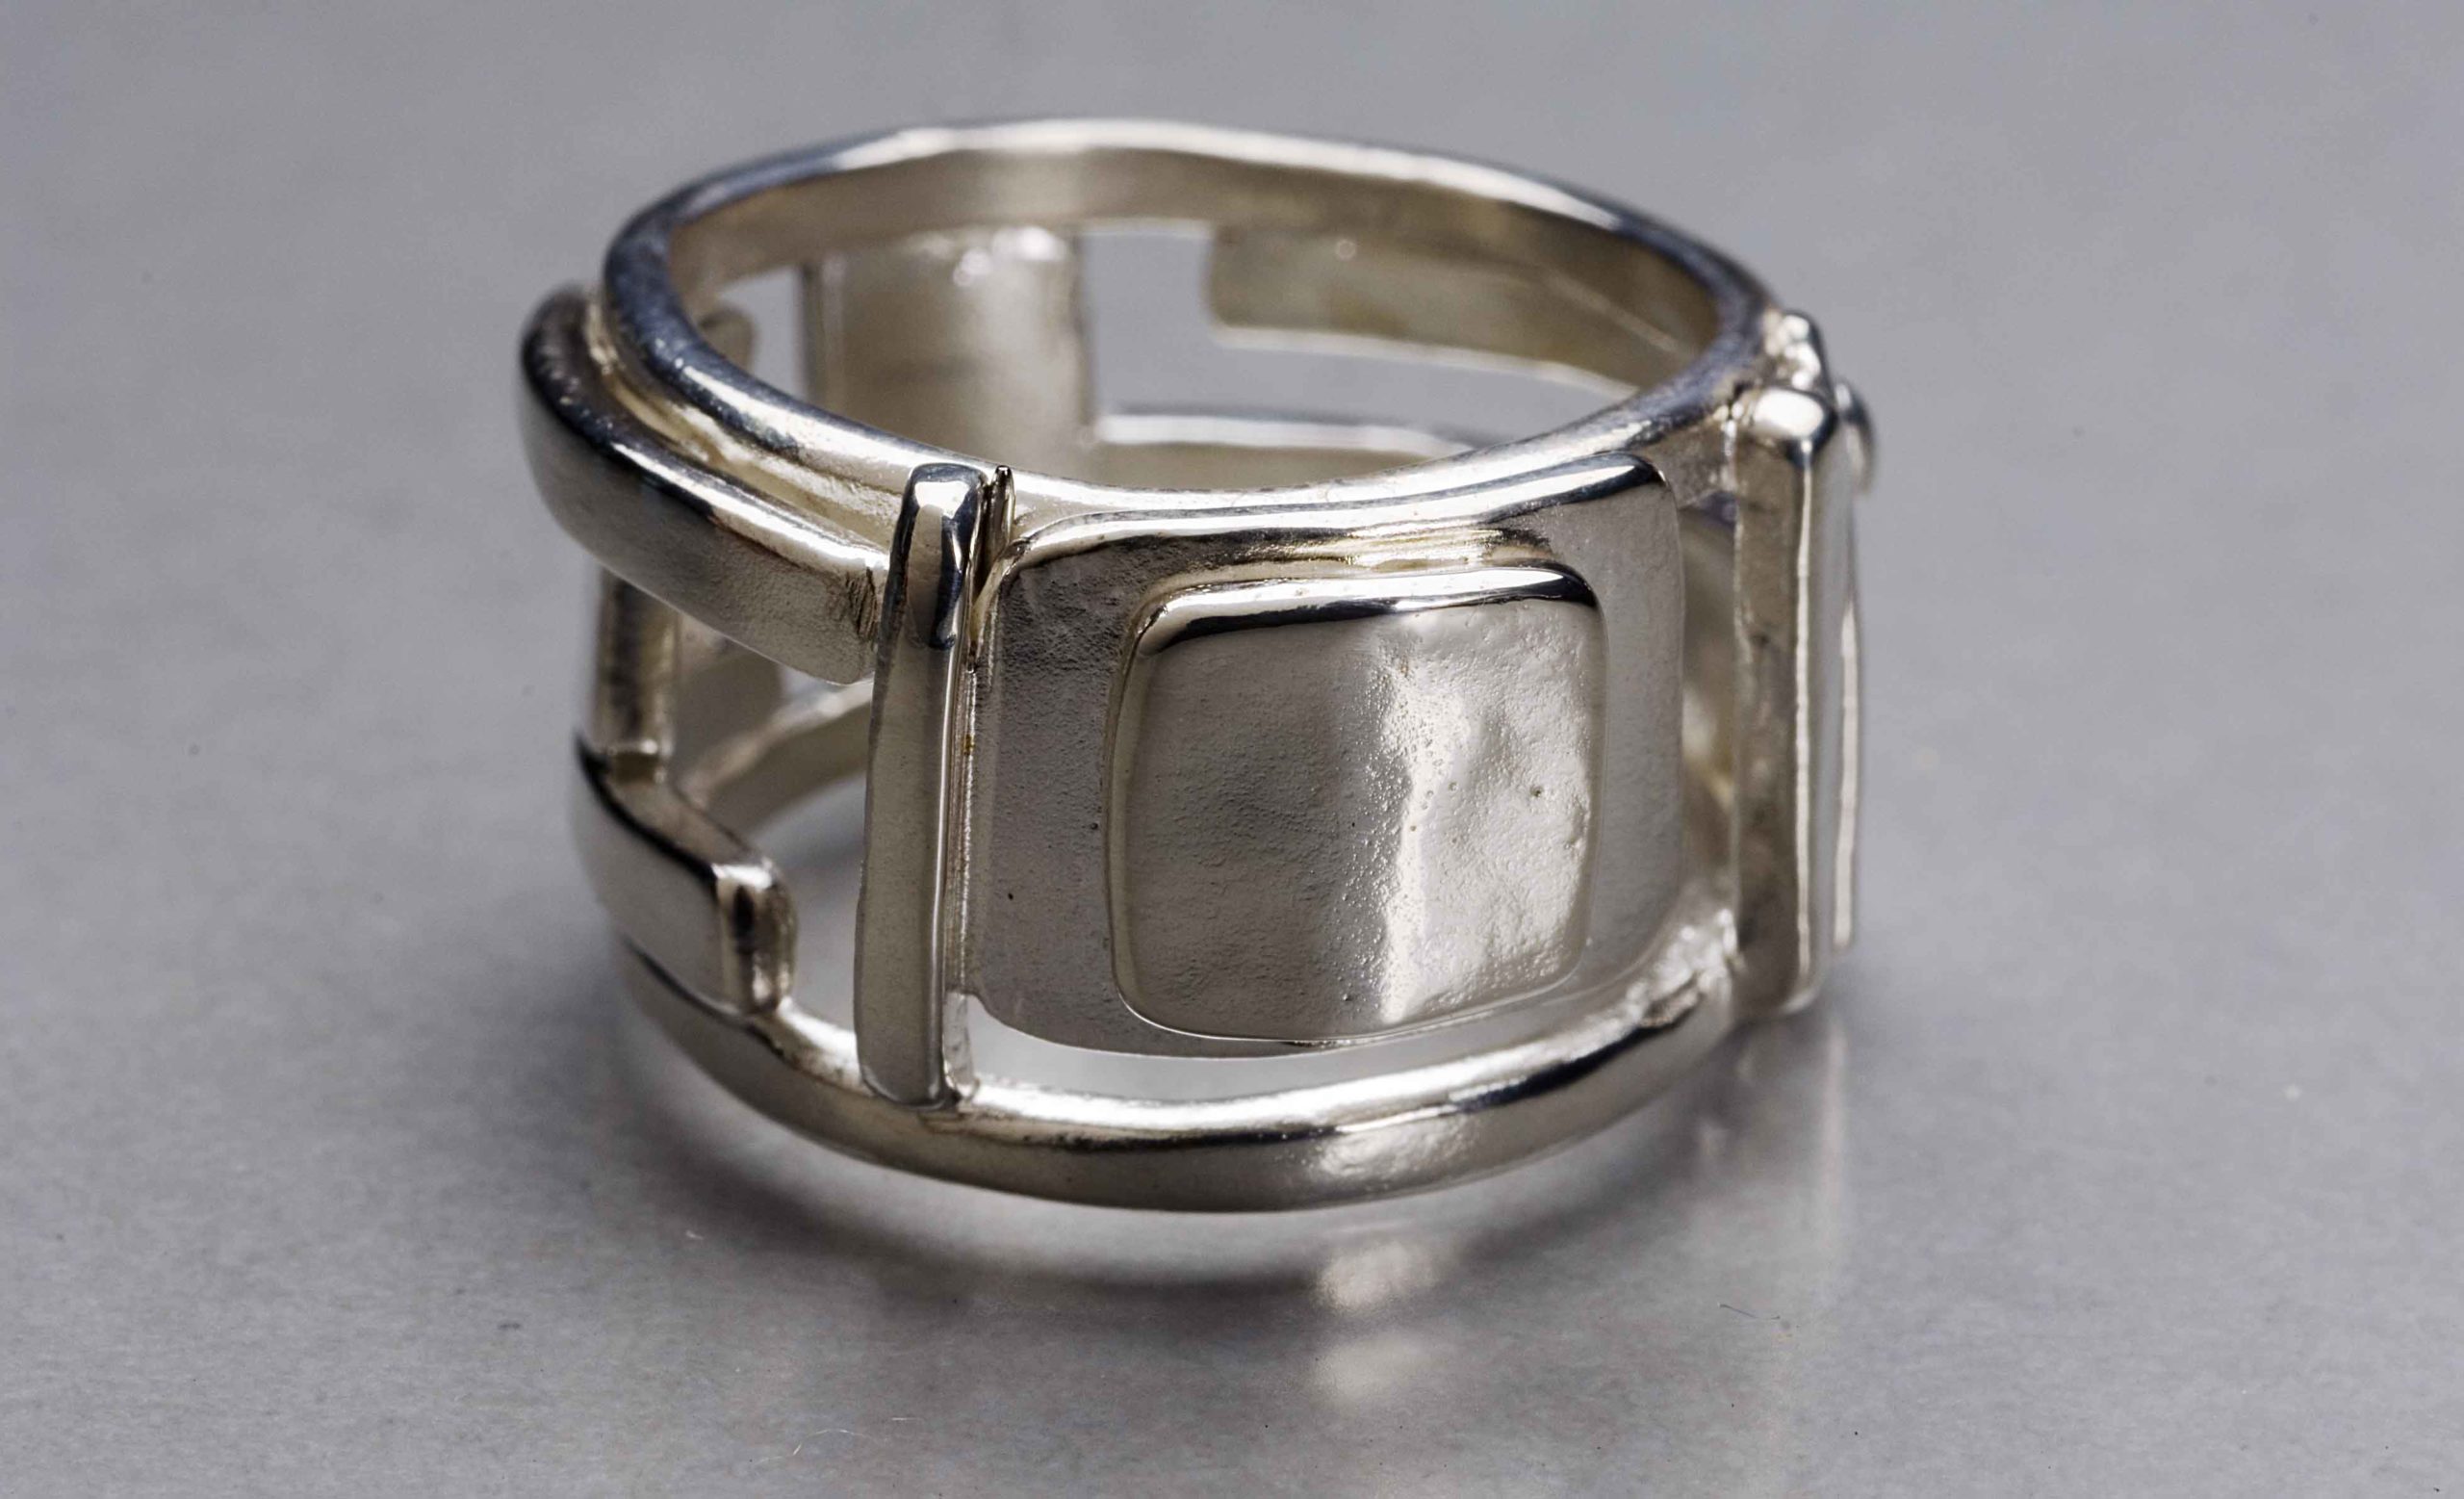 Wide Band Parallel Ring, Engagement Ring in Platinum, 18k + Diamonds -  Catherine Iskiw Designs